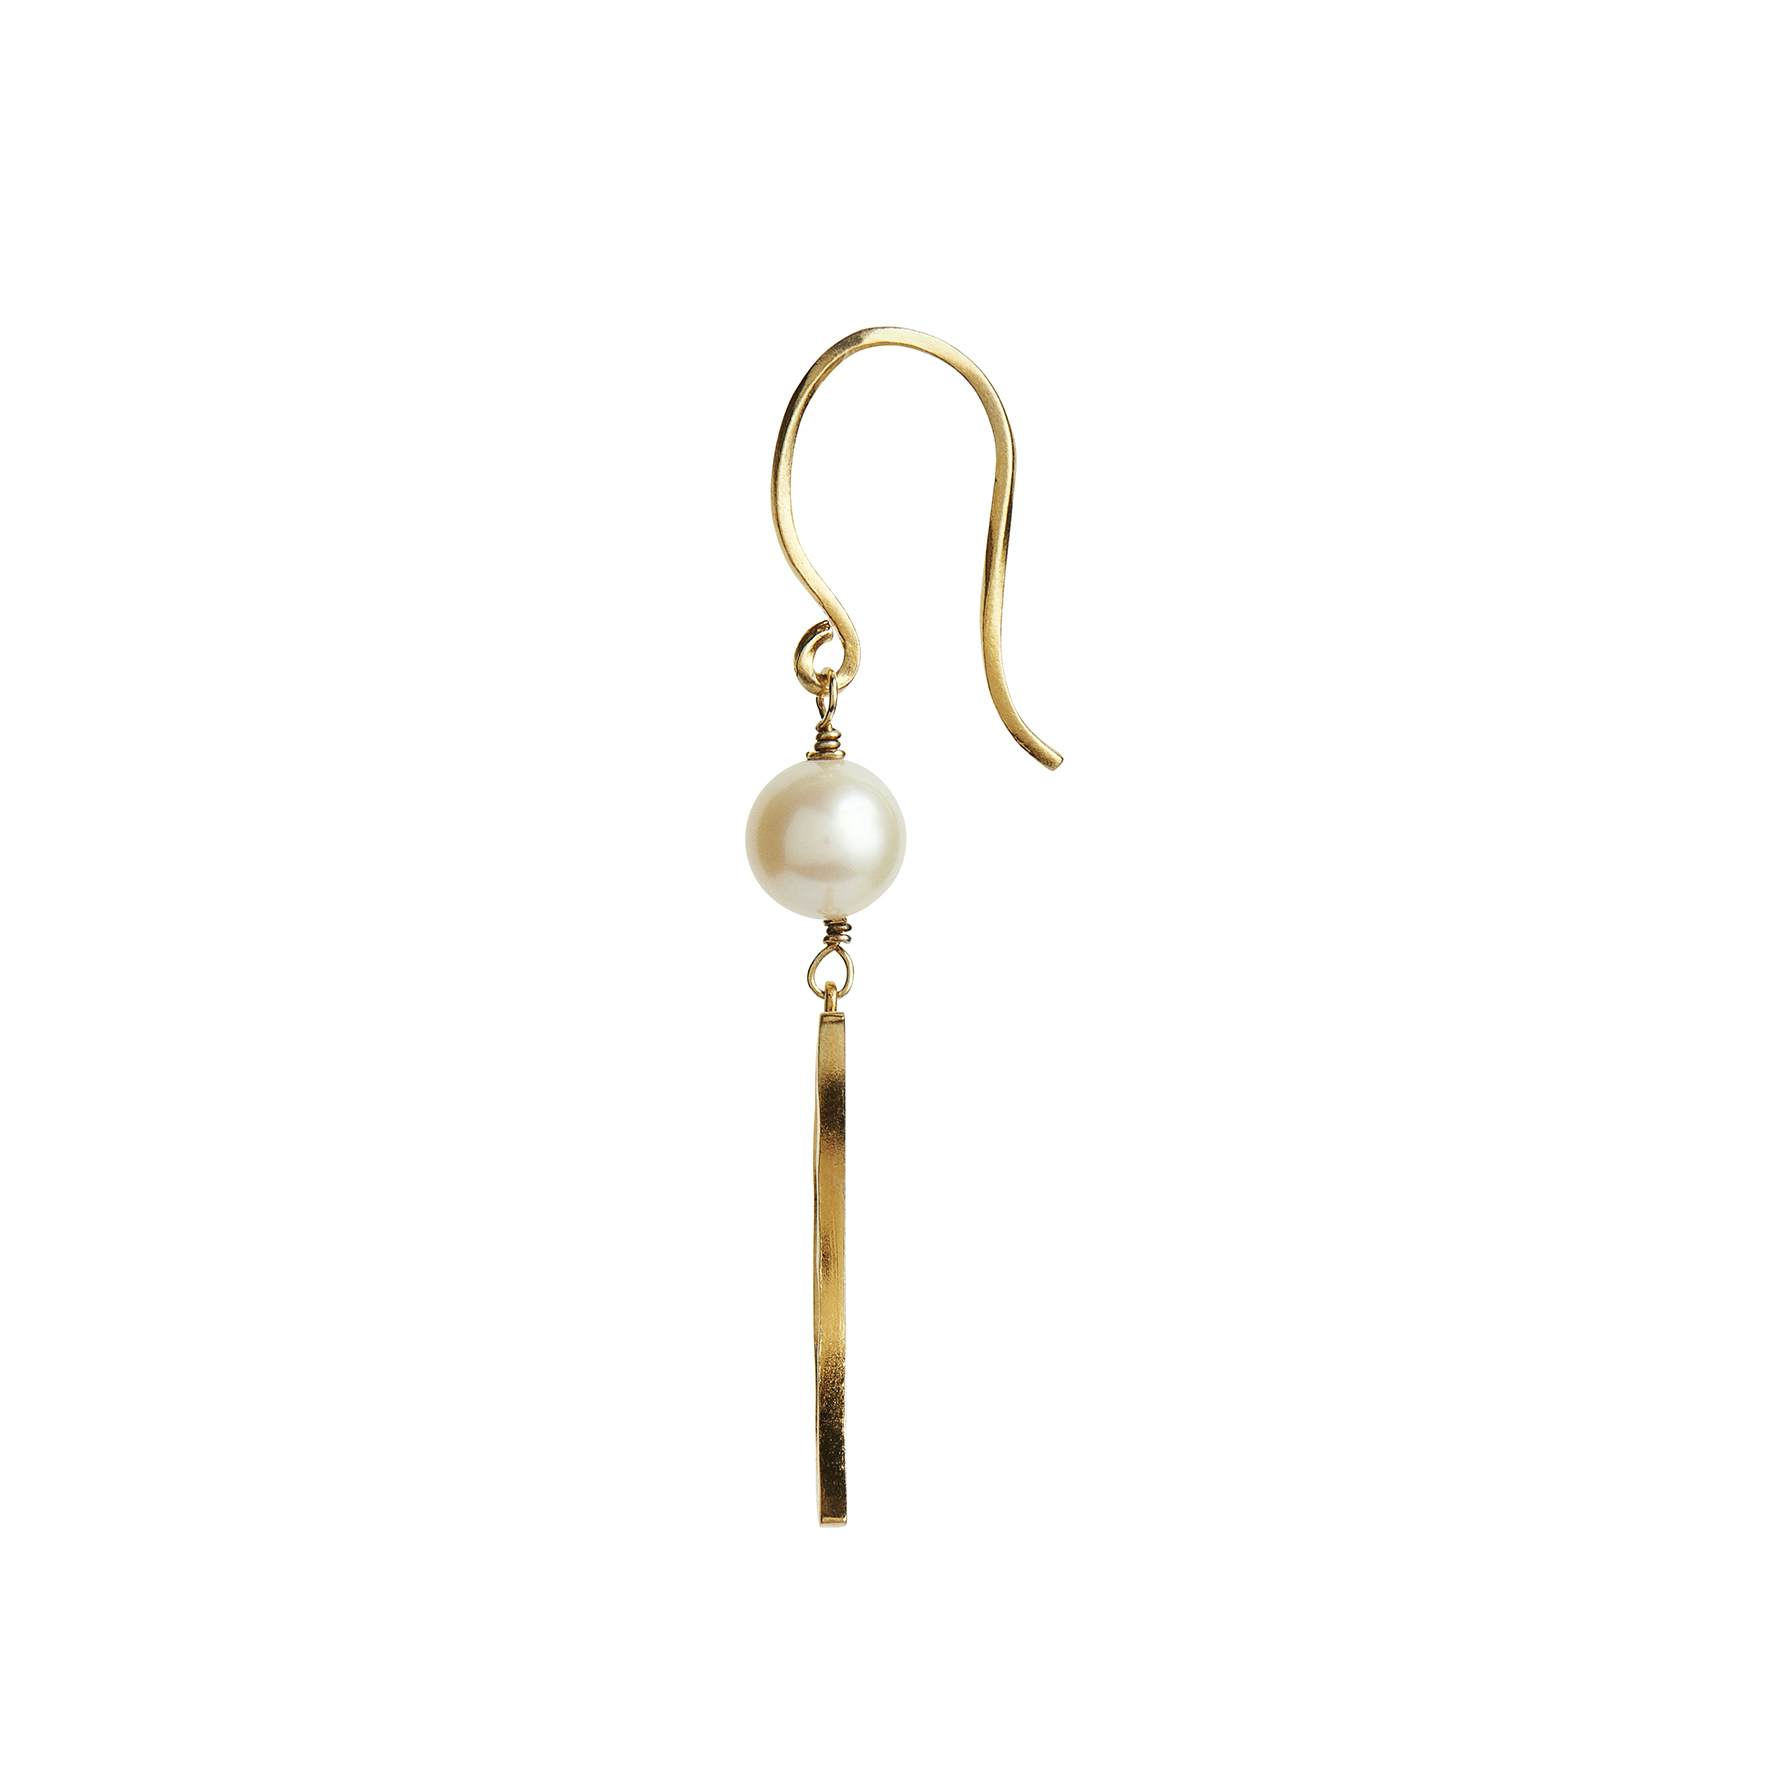 Bella Moon Earring With Pearl von STINE A Jewelry in Vergoldet-Silber Sterling 925